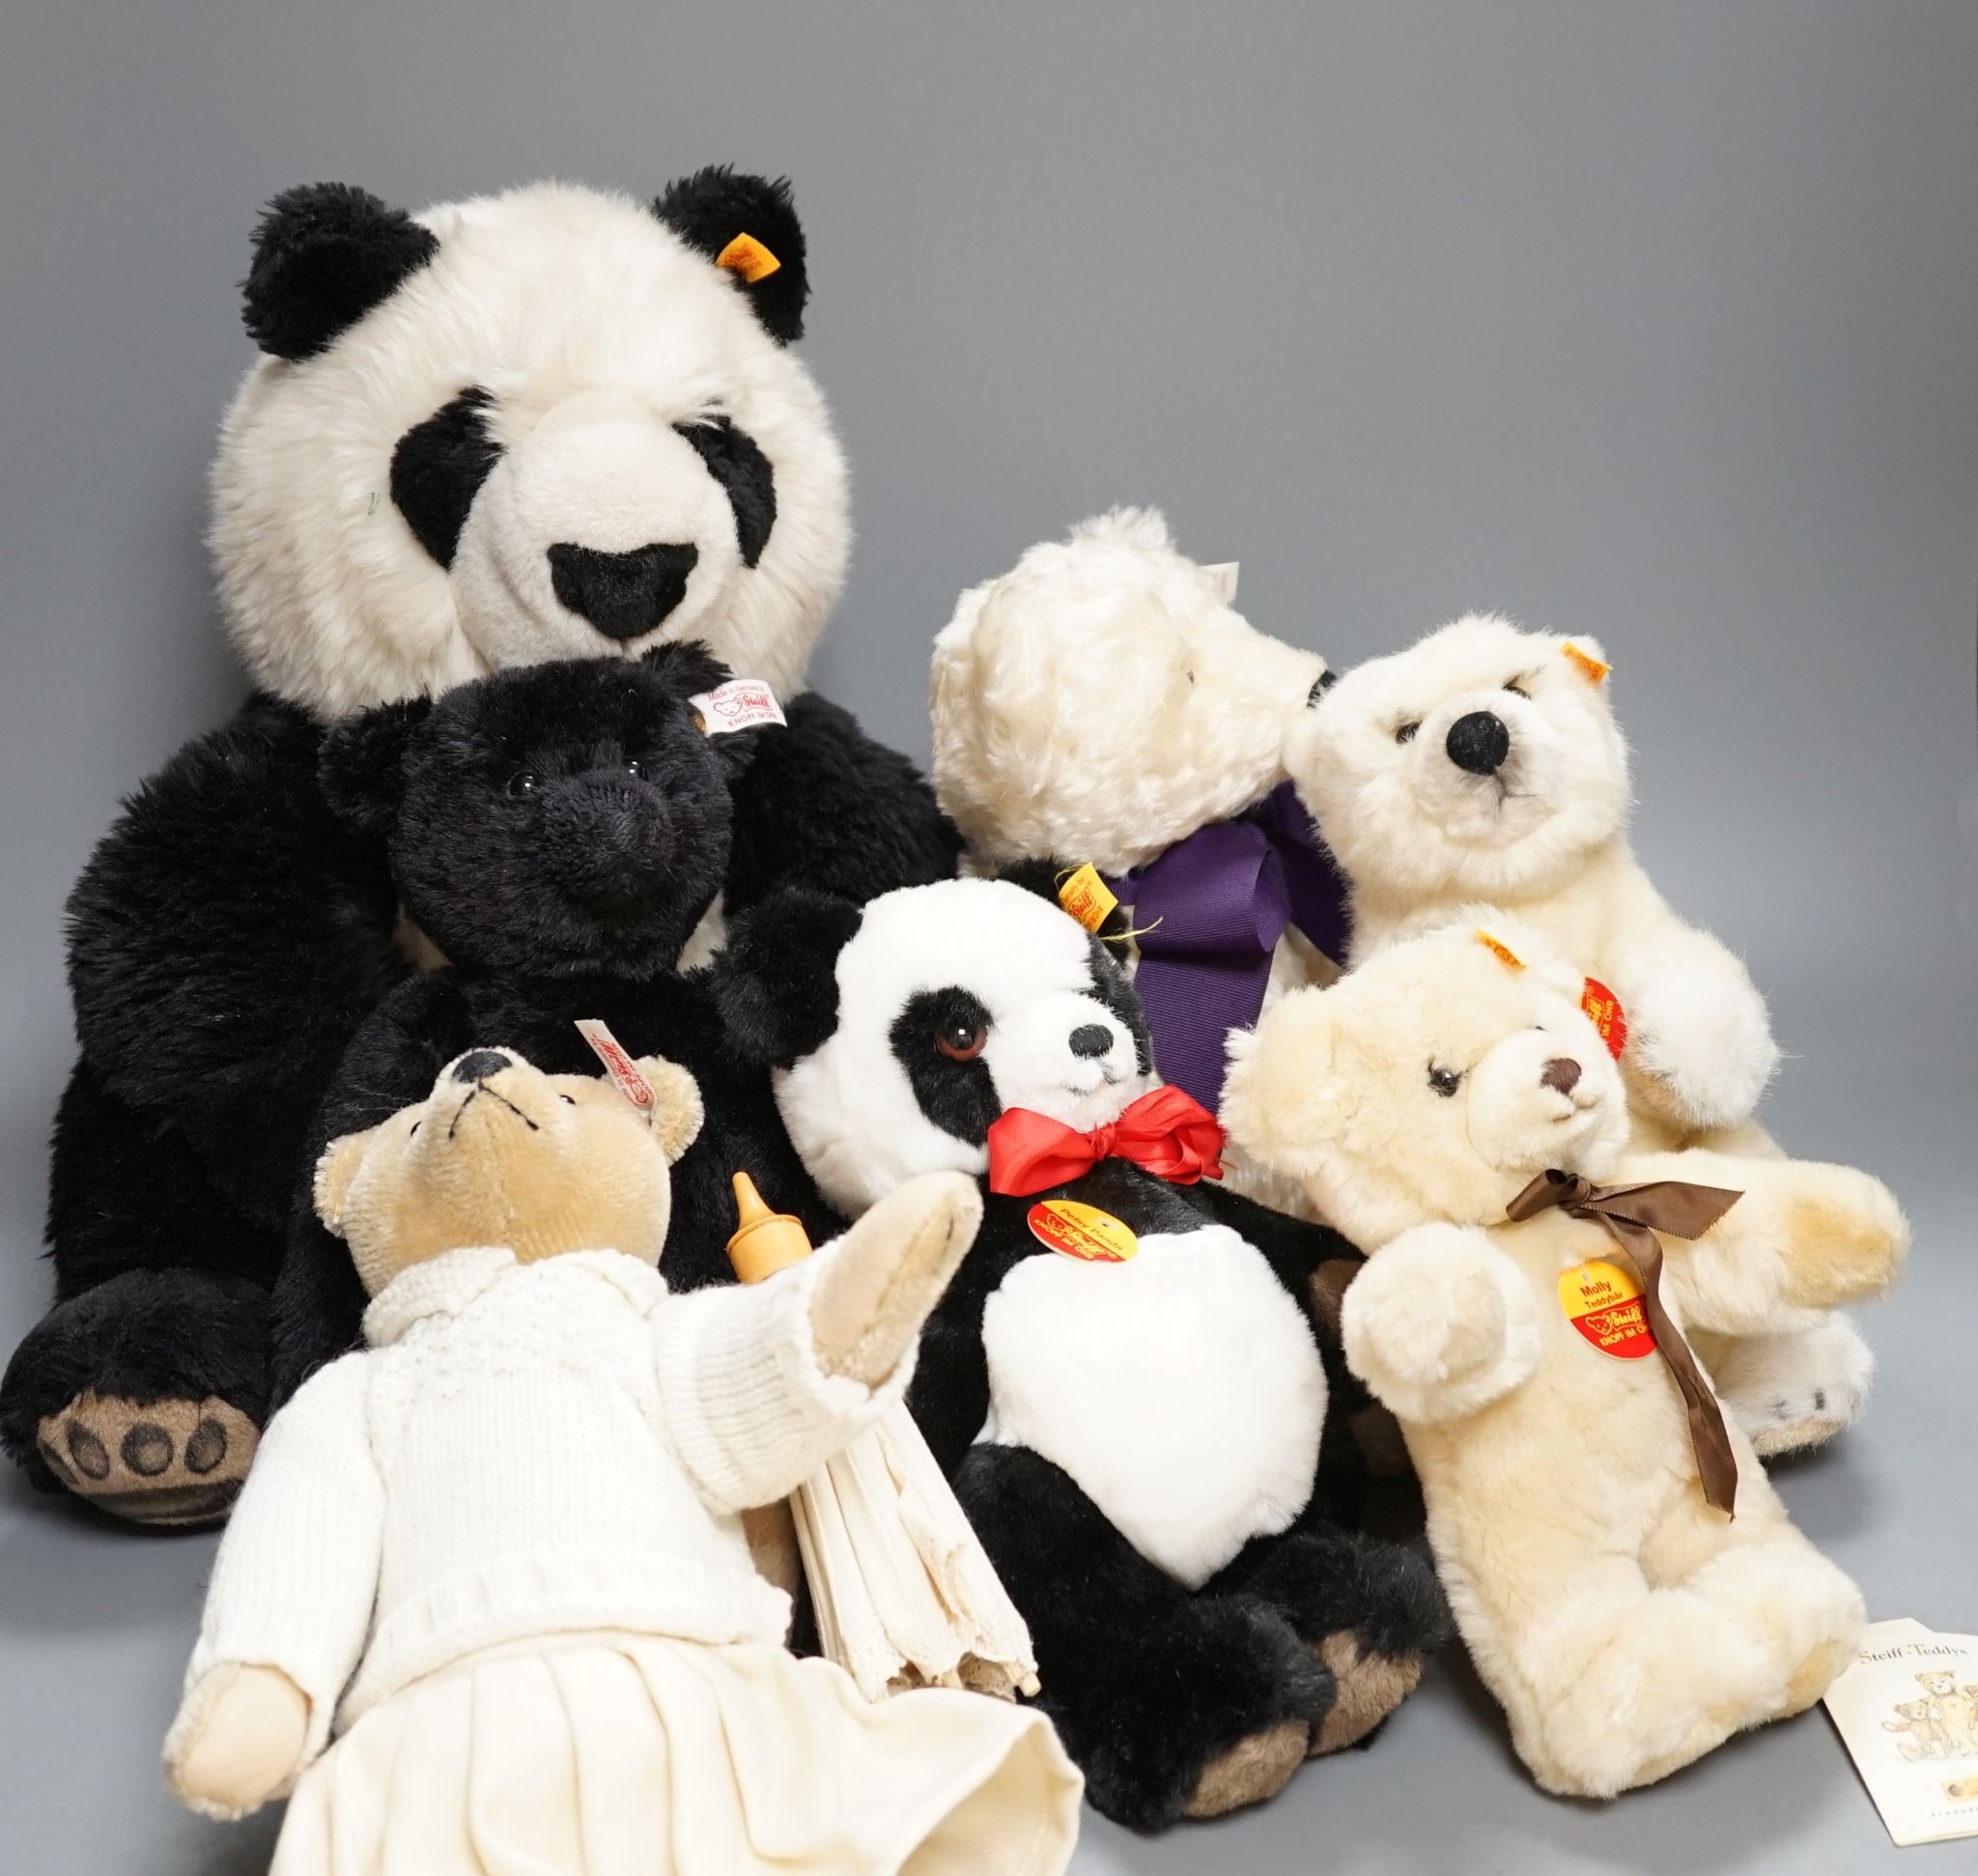 Four post war Steiff animals including 'Pat and Nora' Limited Edition Steiff with parasol but no box, and a white Limited Edition Steiff bear with white label for Hamleys